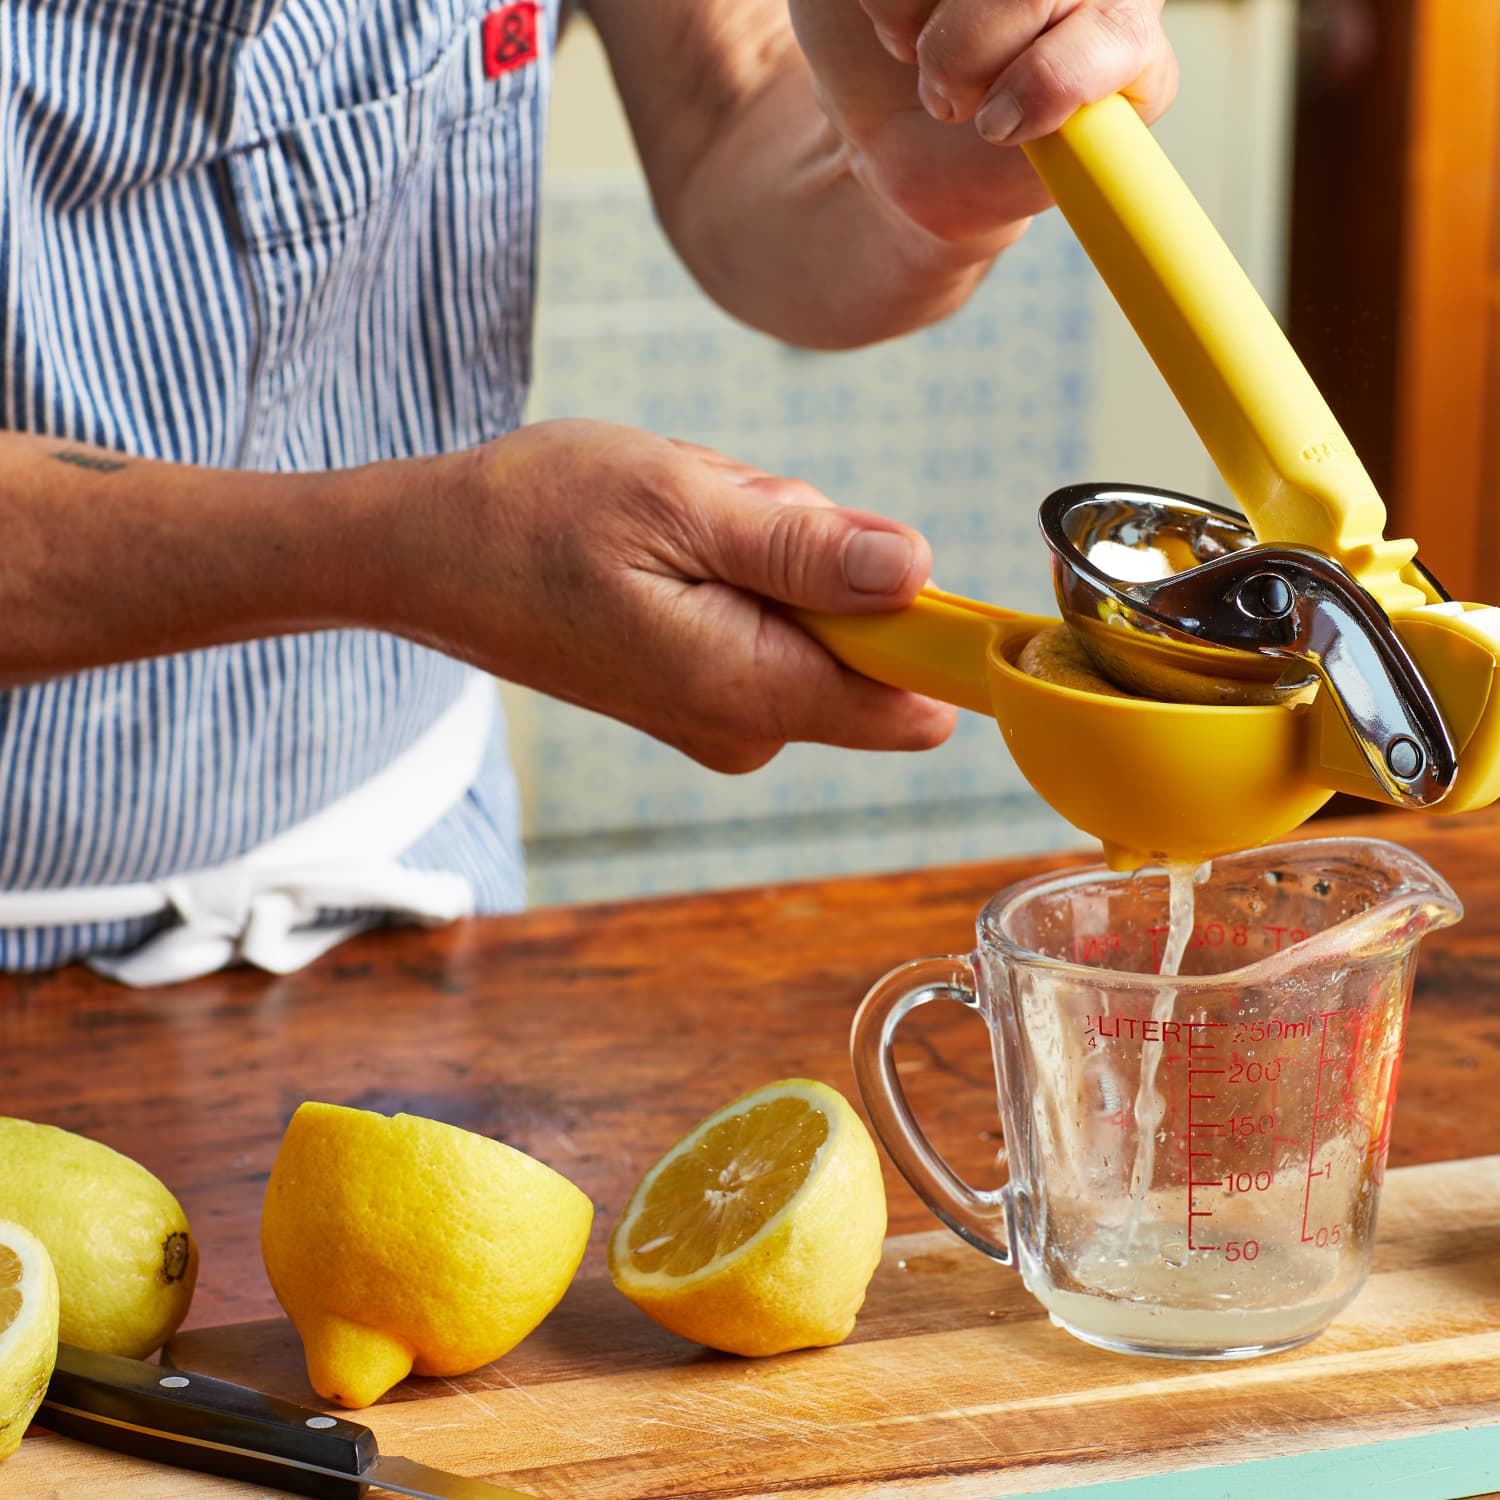 We Didn’t Think It Was Possible to Love a Lemon Juicer This Much